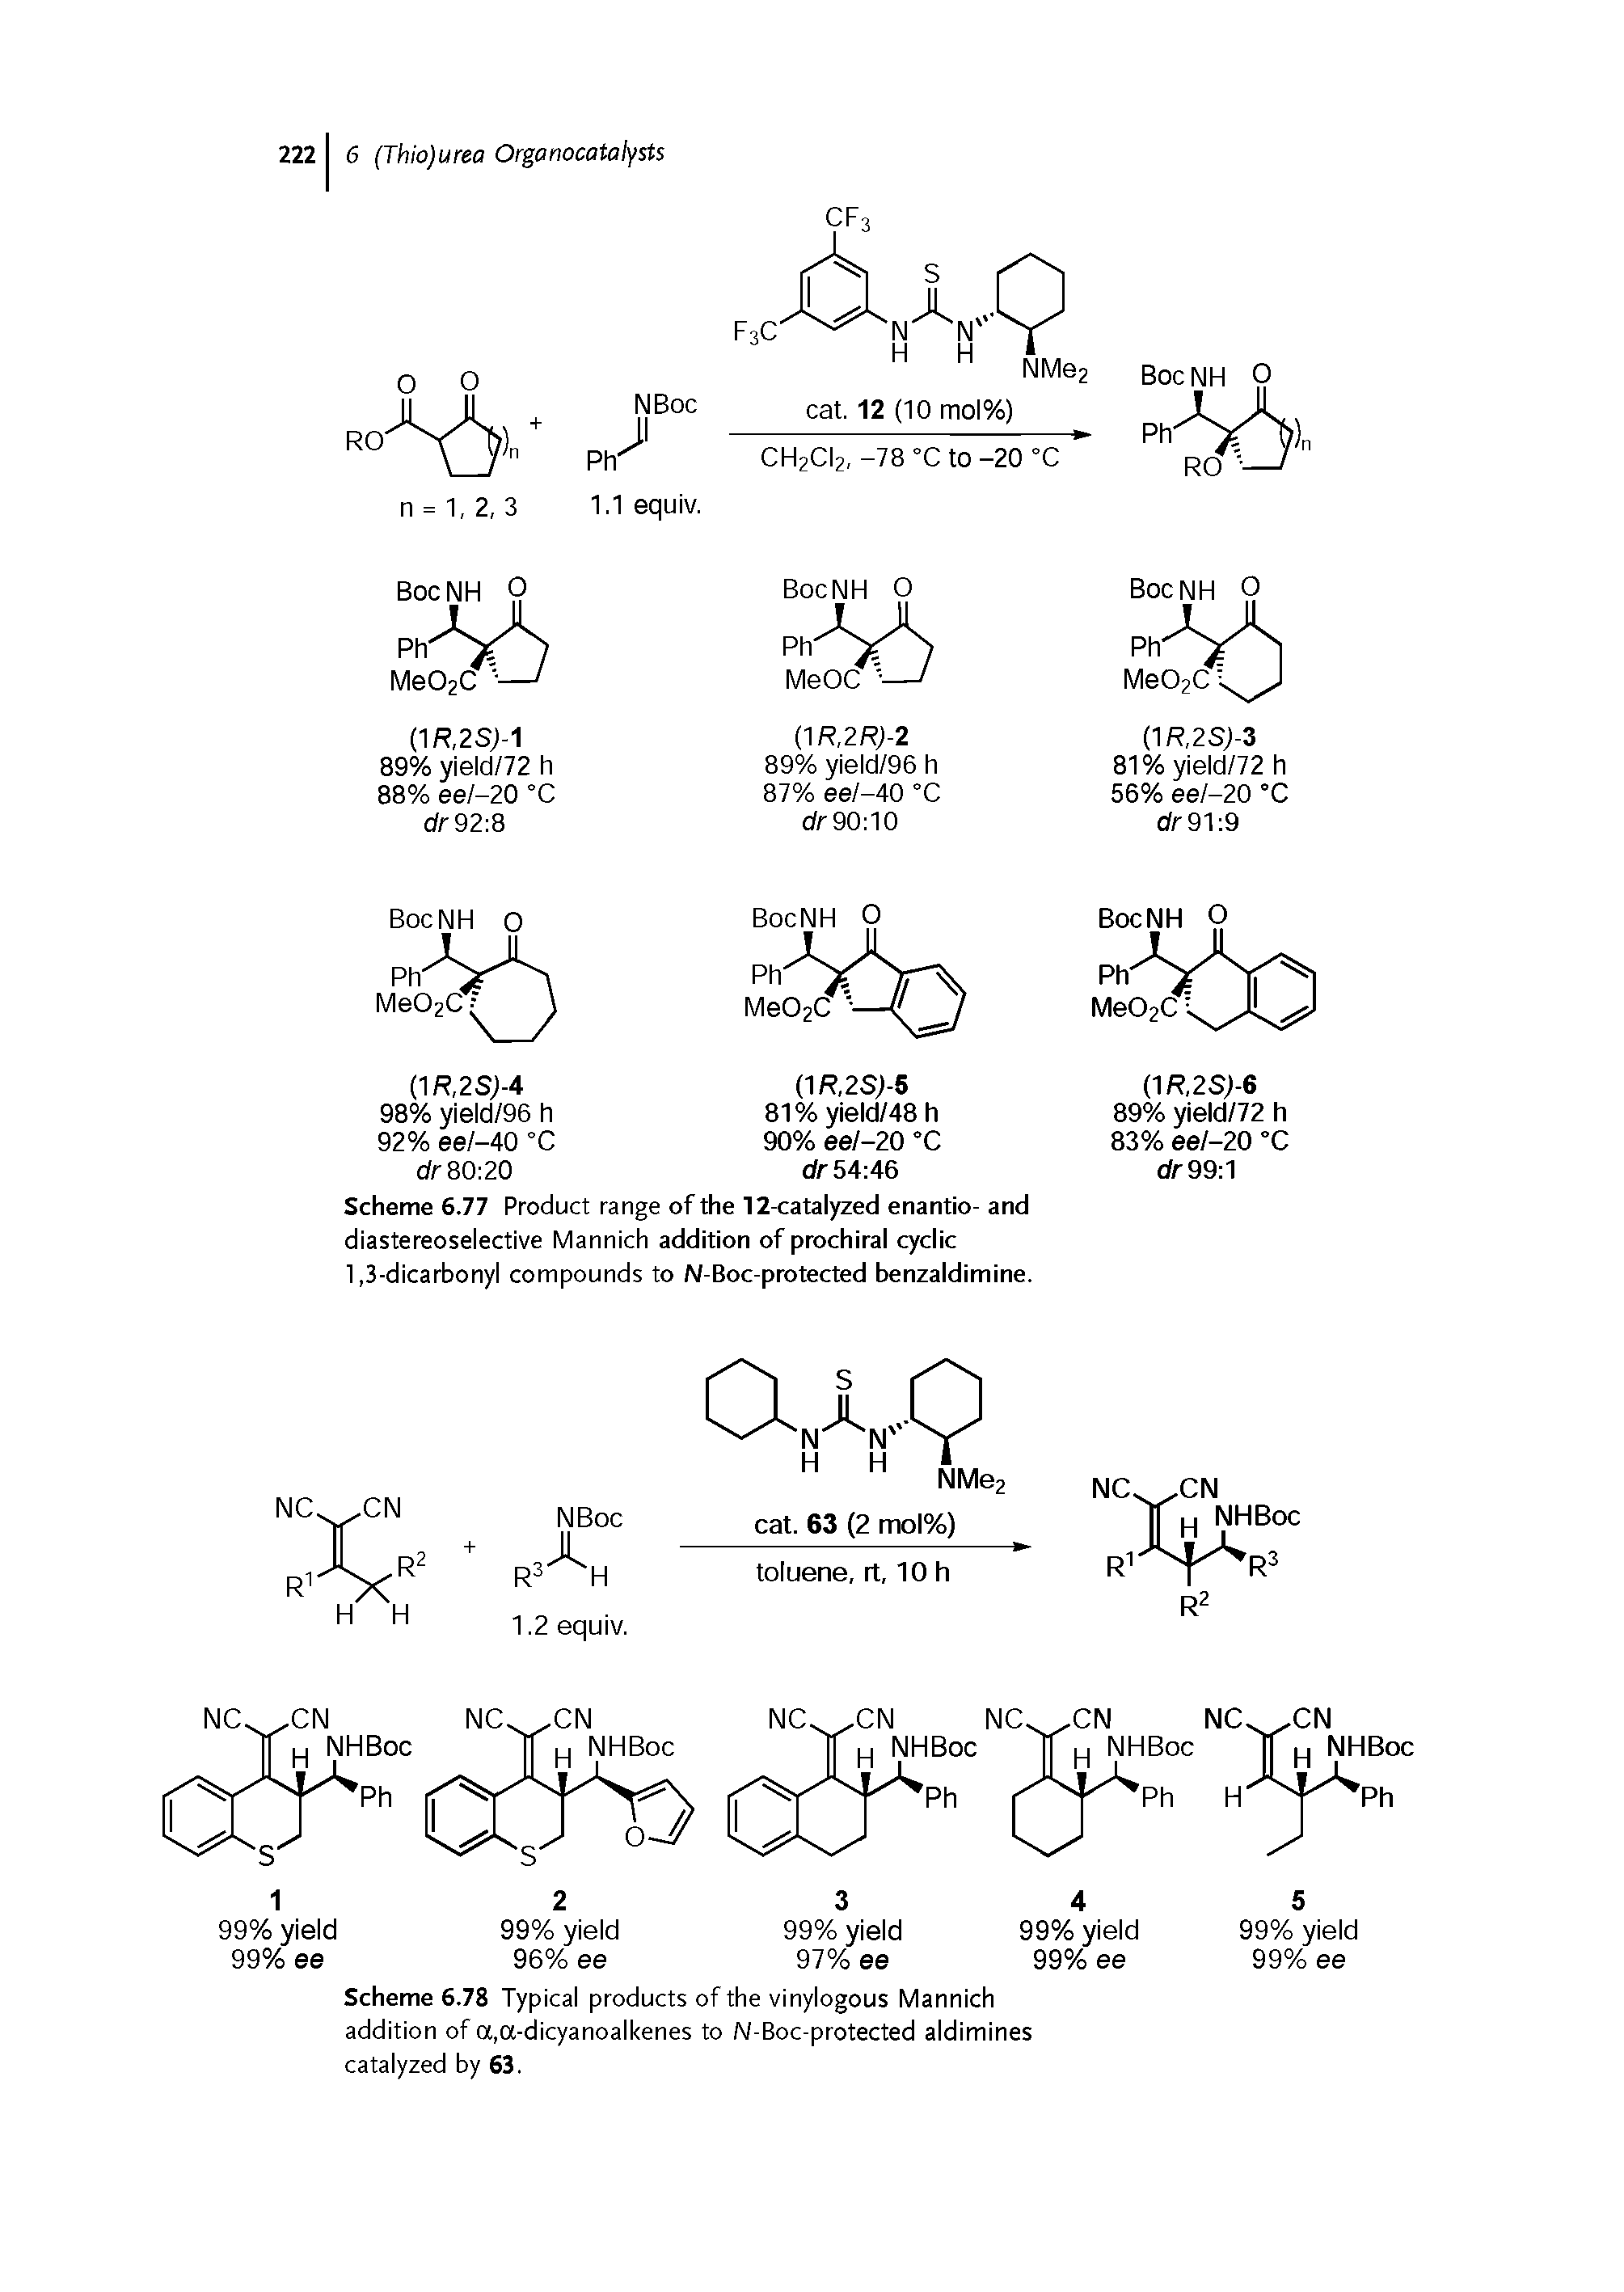 Scheme 6.78 Typical products of the vinylogous Mannich addition of a,a-dicyanoalkenes to N-Boc-protected aldimines catalyzed by 63.